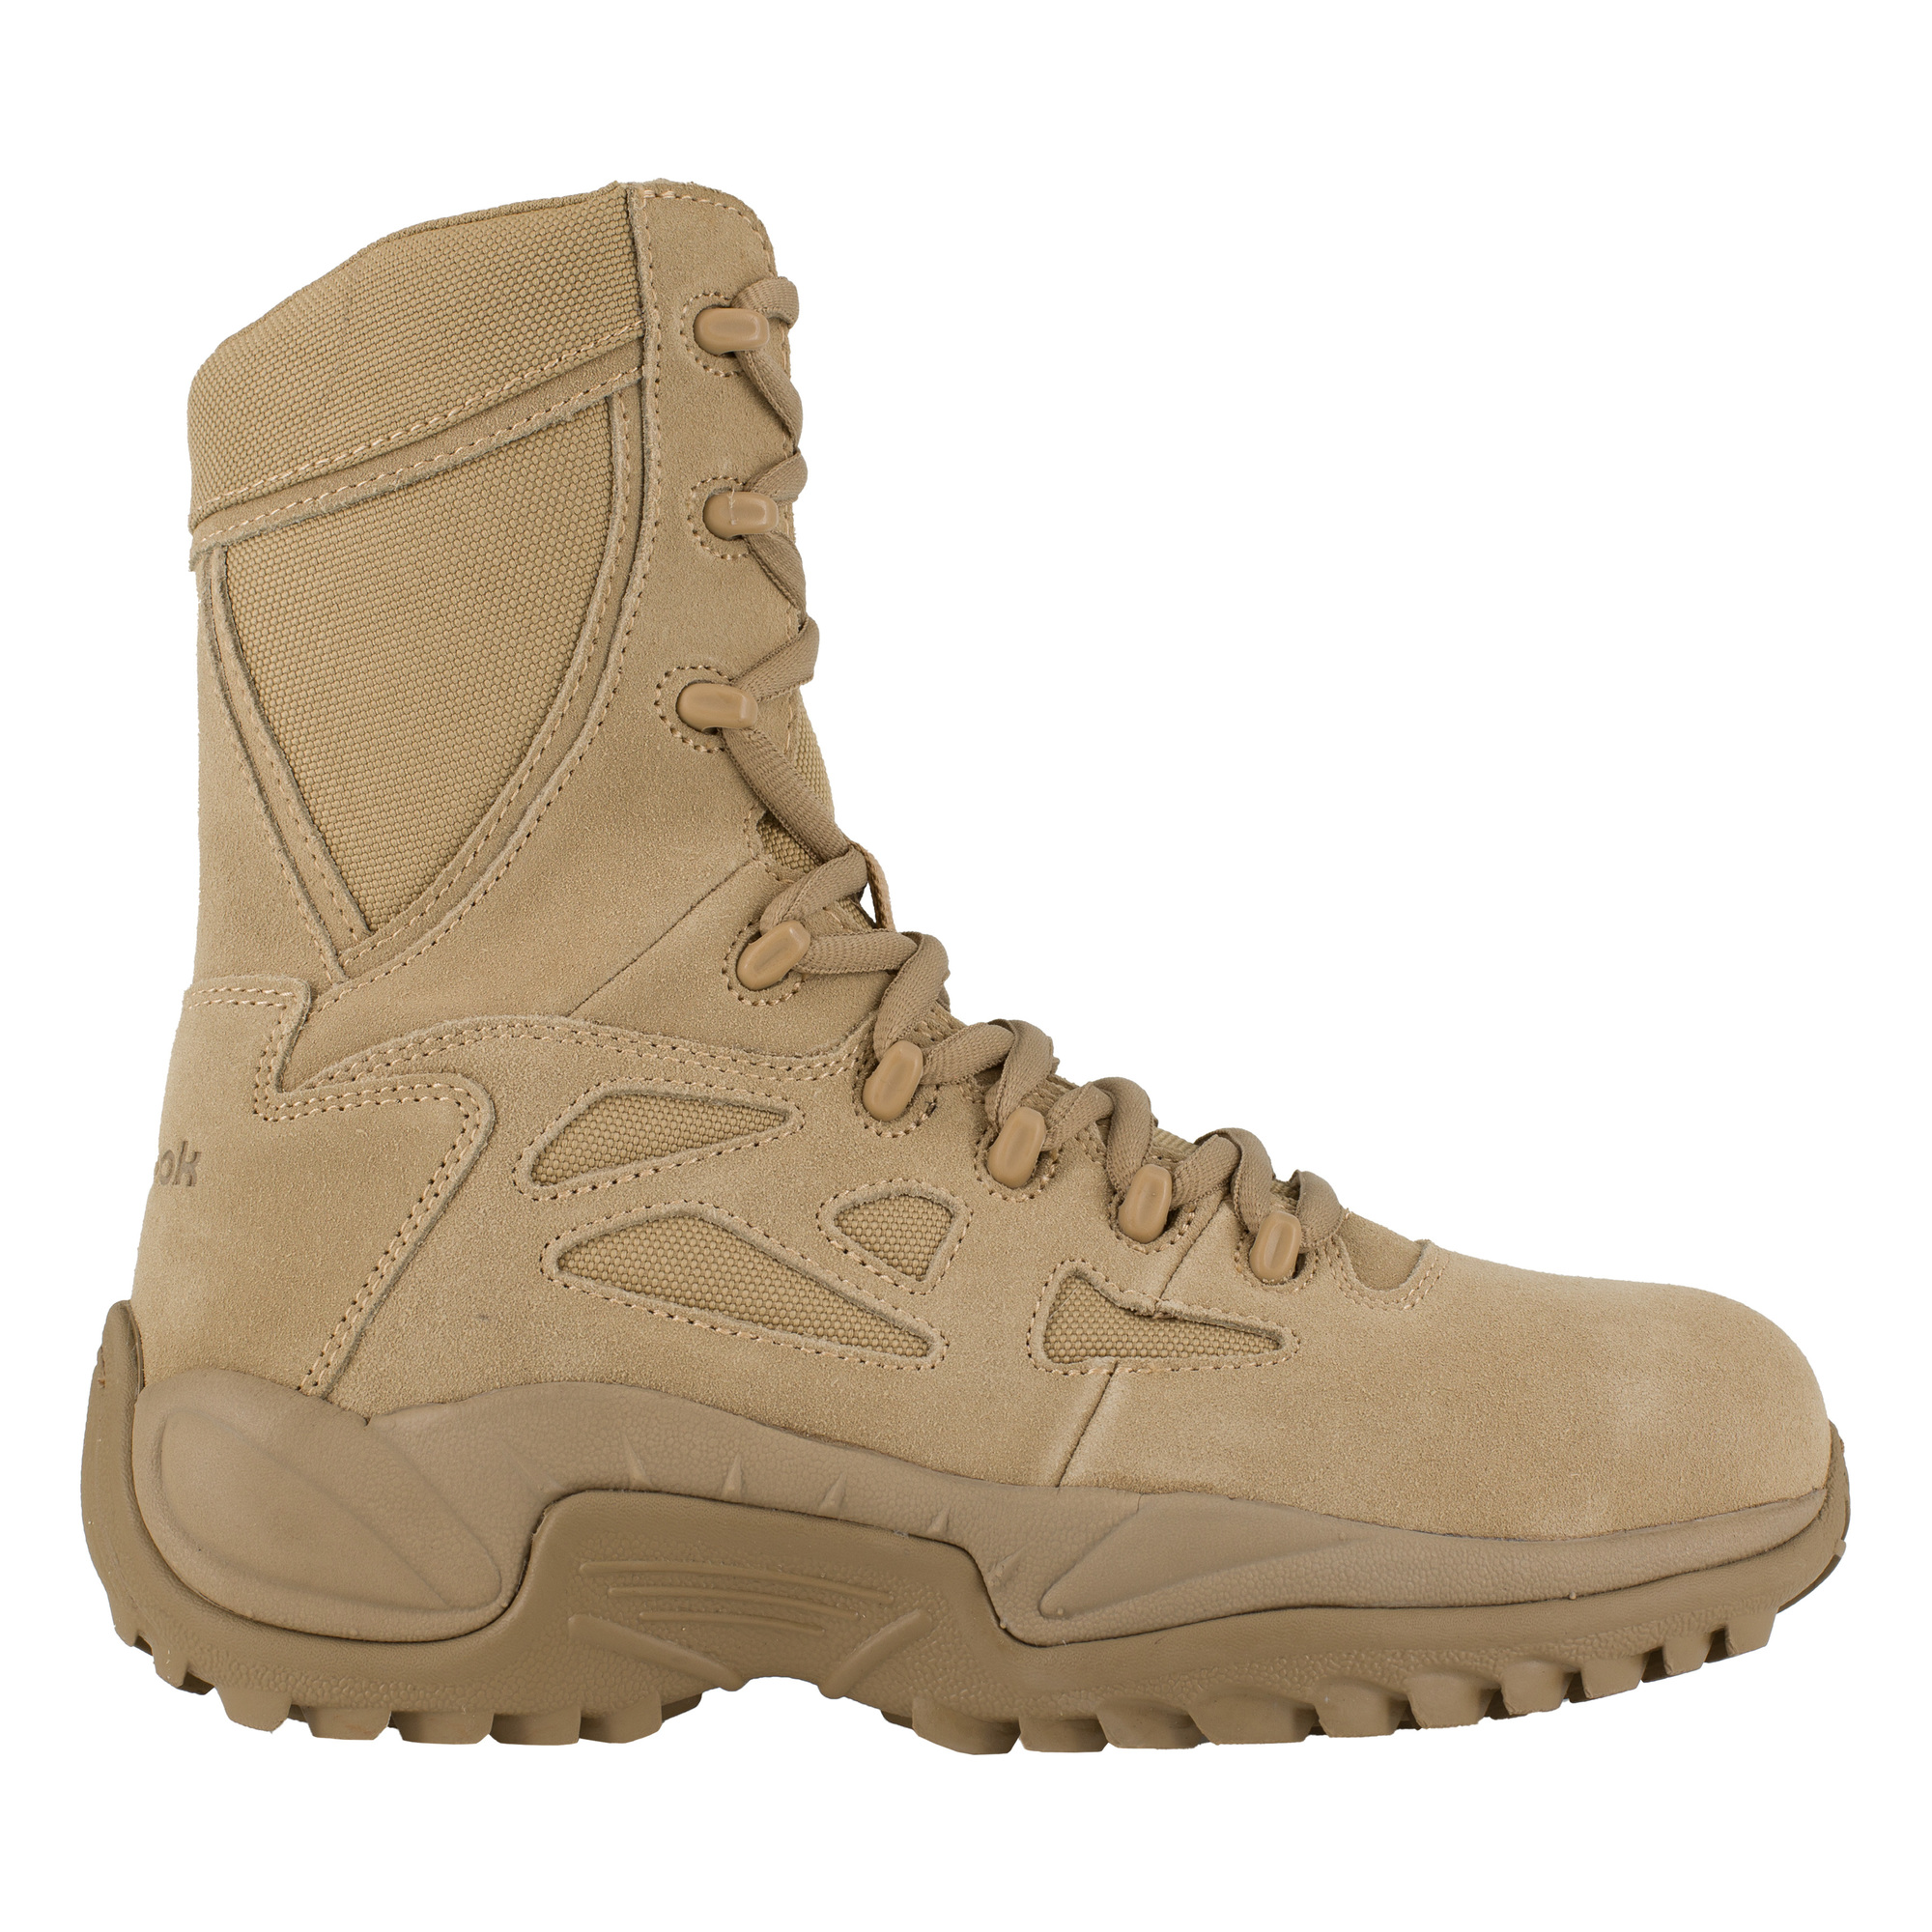 Reebok, 8Inch Stealth Tactical Boot with Side Zipper, Size 11, Width Medium, Color Desert Tan, Model RB894